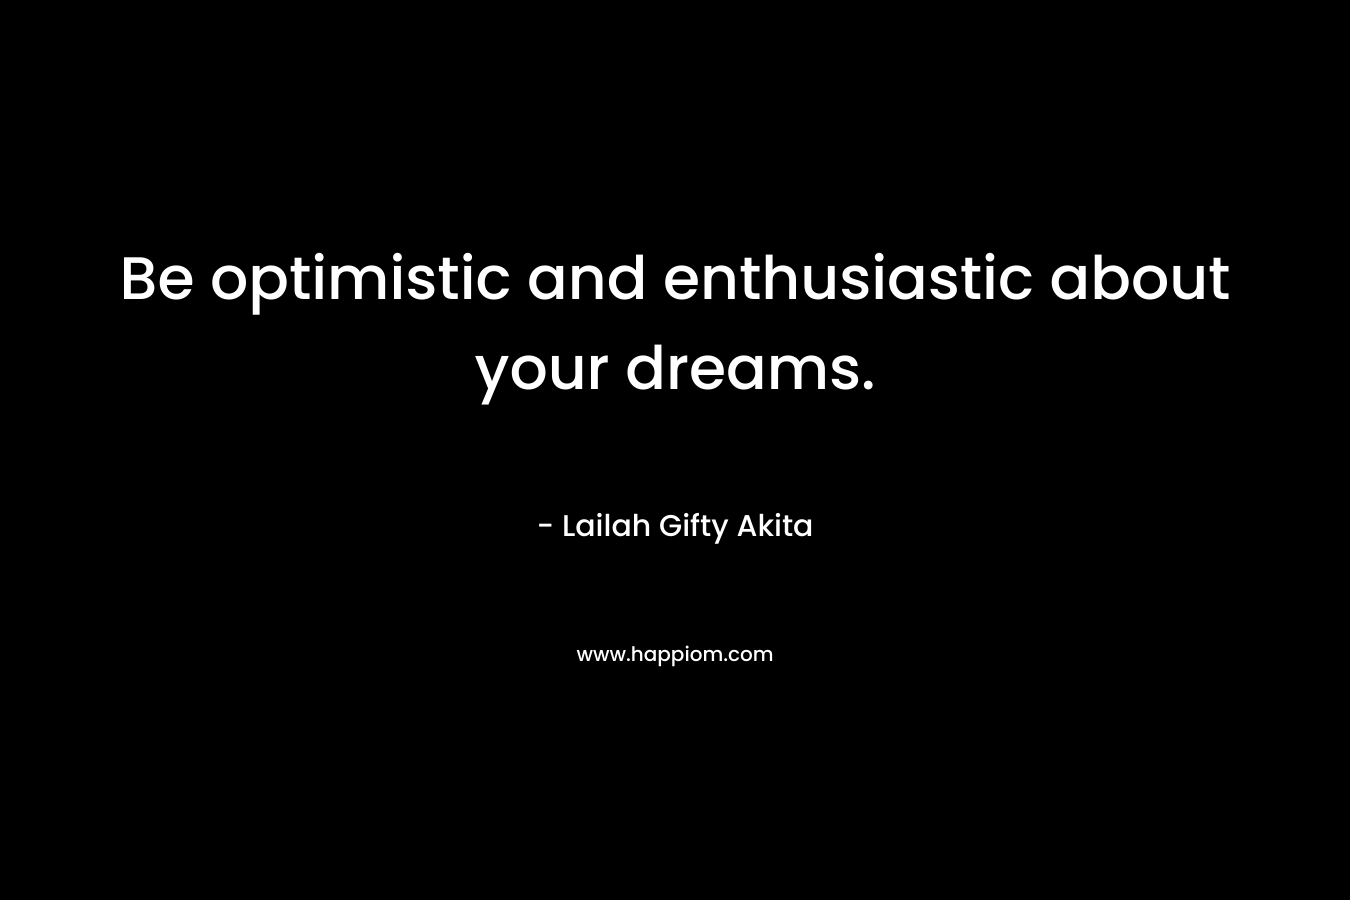 Be optimistic and enthusiastic about your dreams.